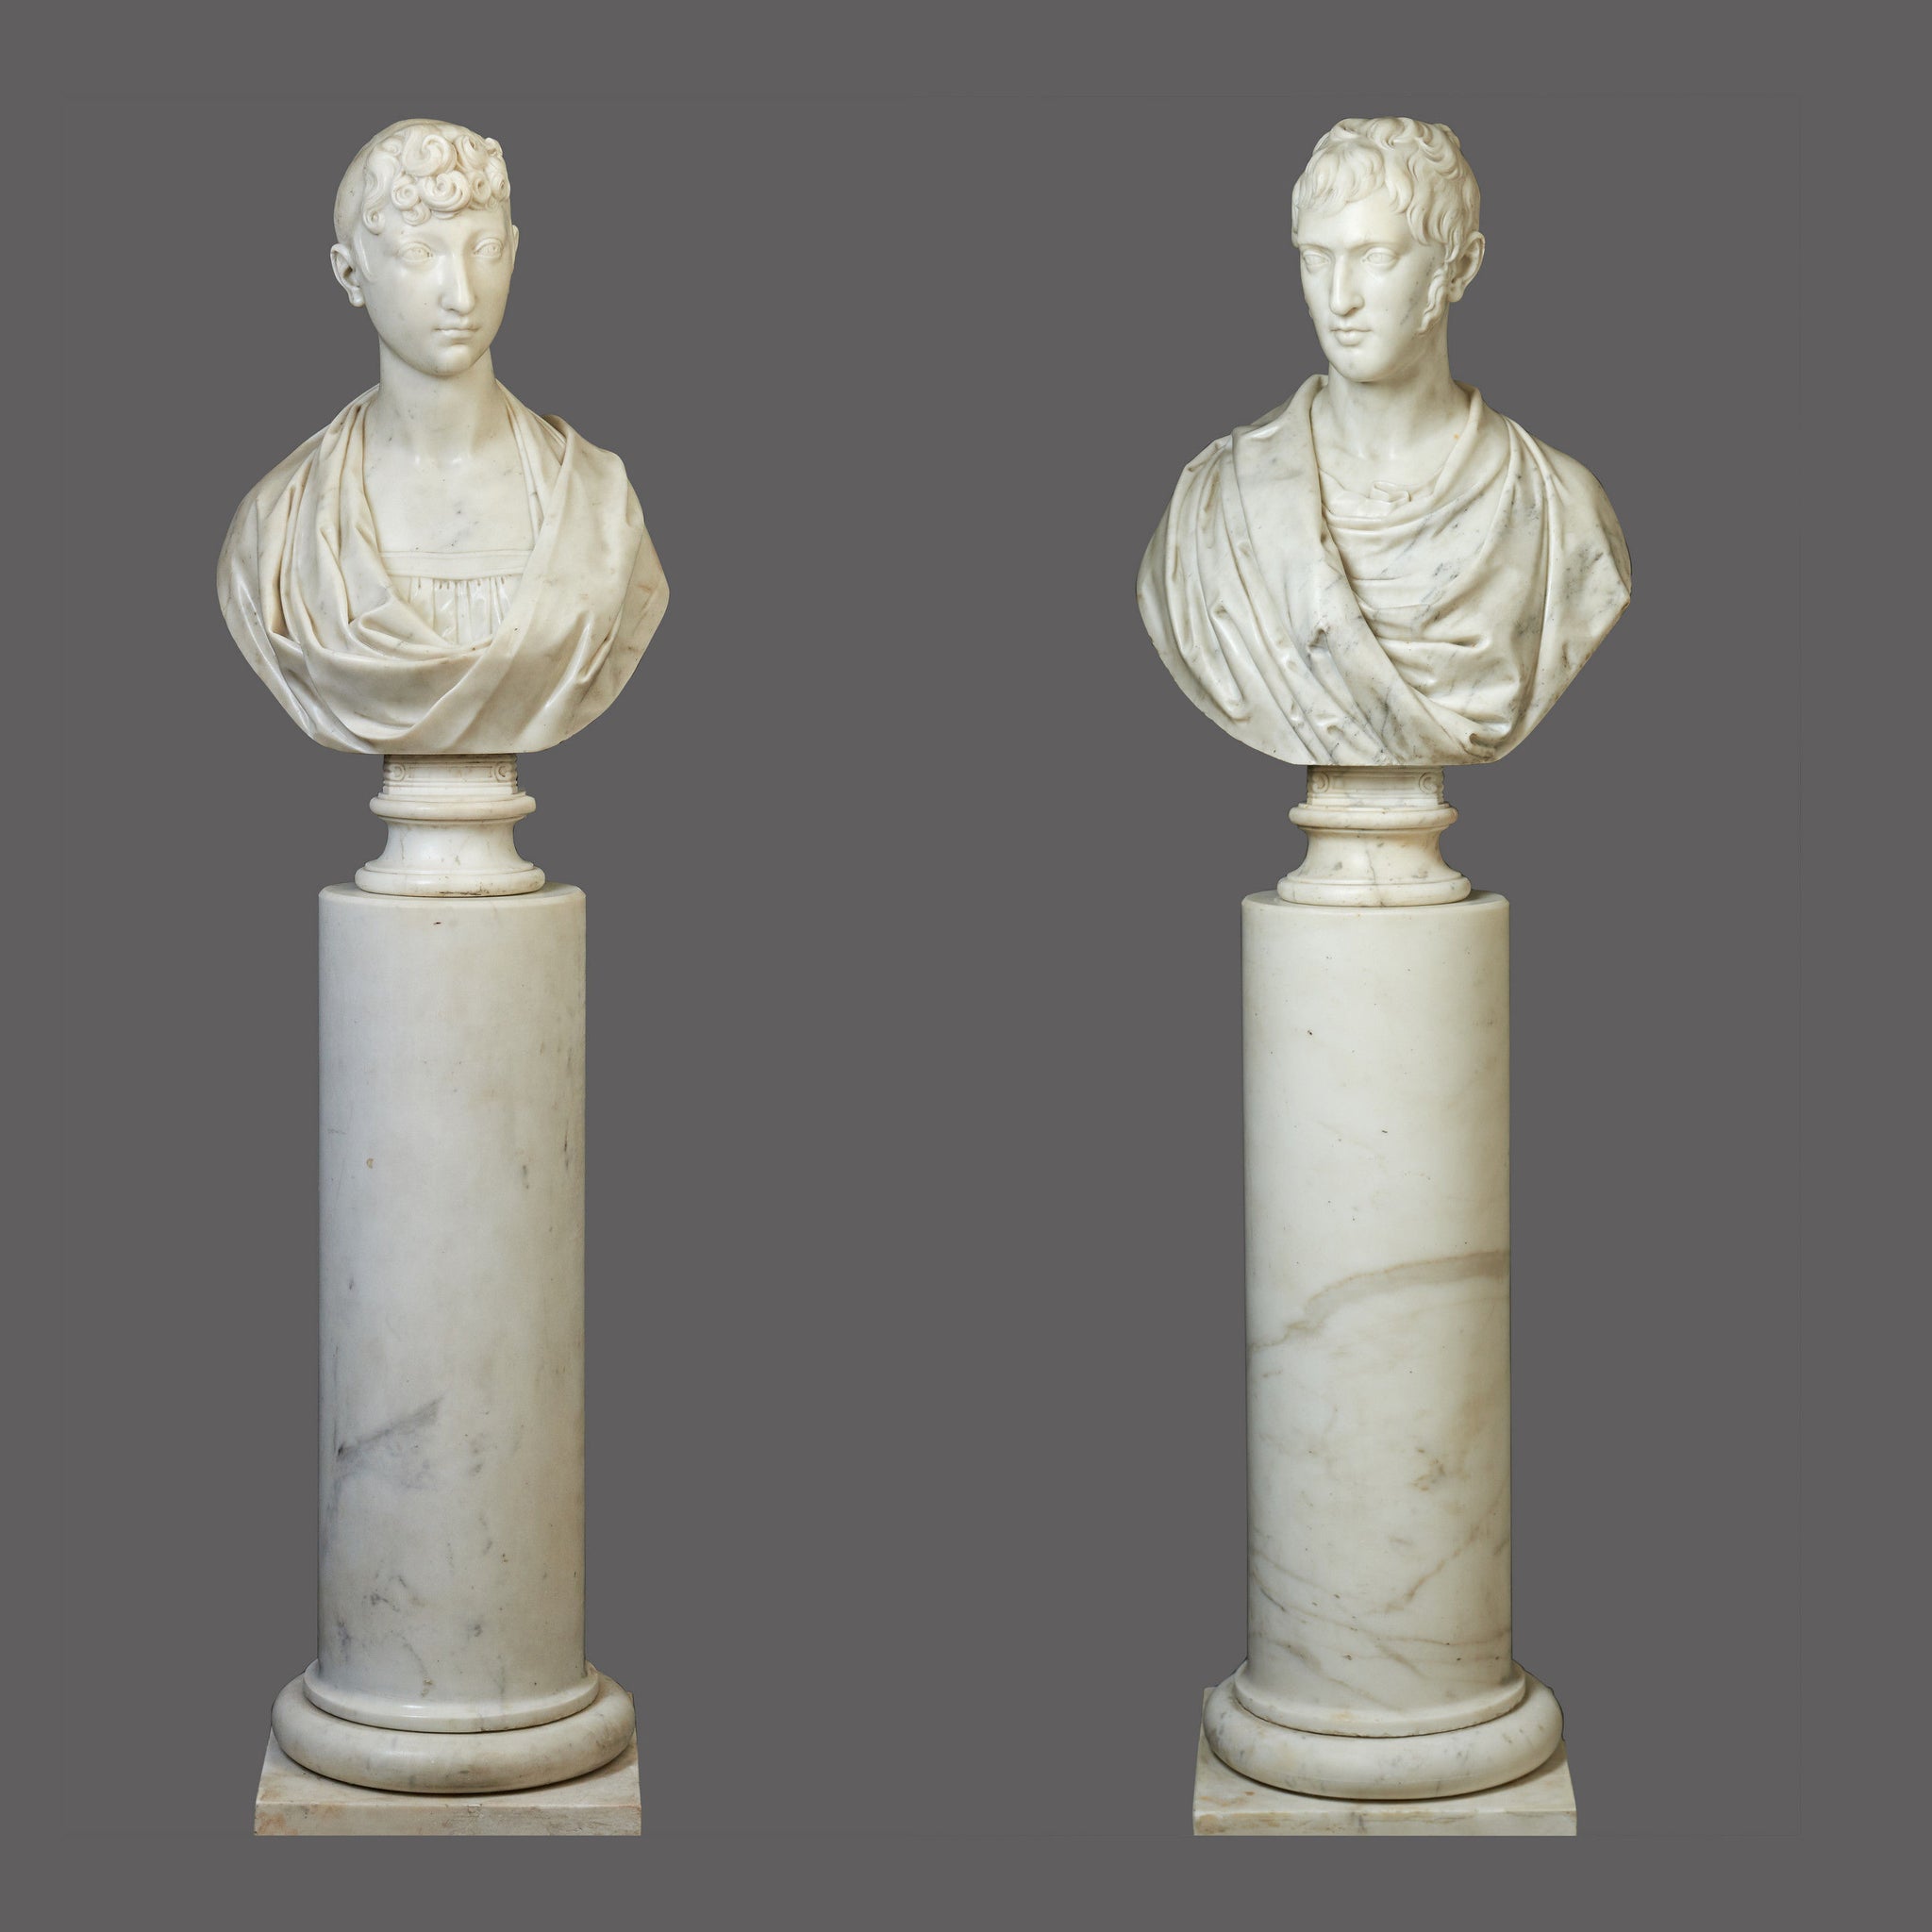 Exceptional Pair of Marble Busts of Pauline Bonaparte & General Charles Leclerc on original columns